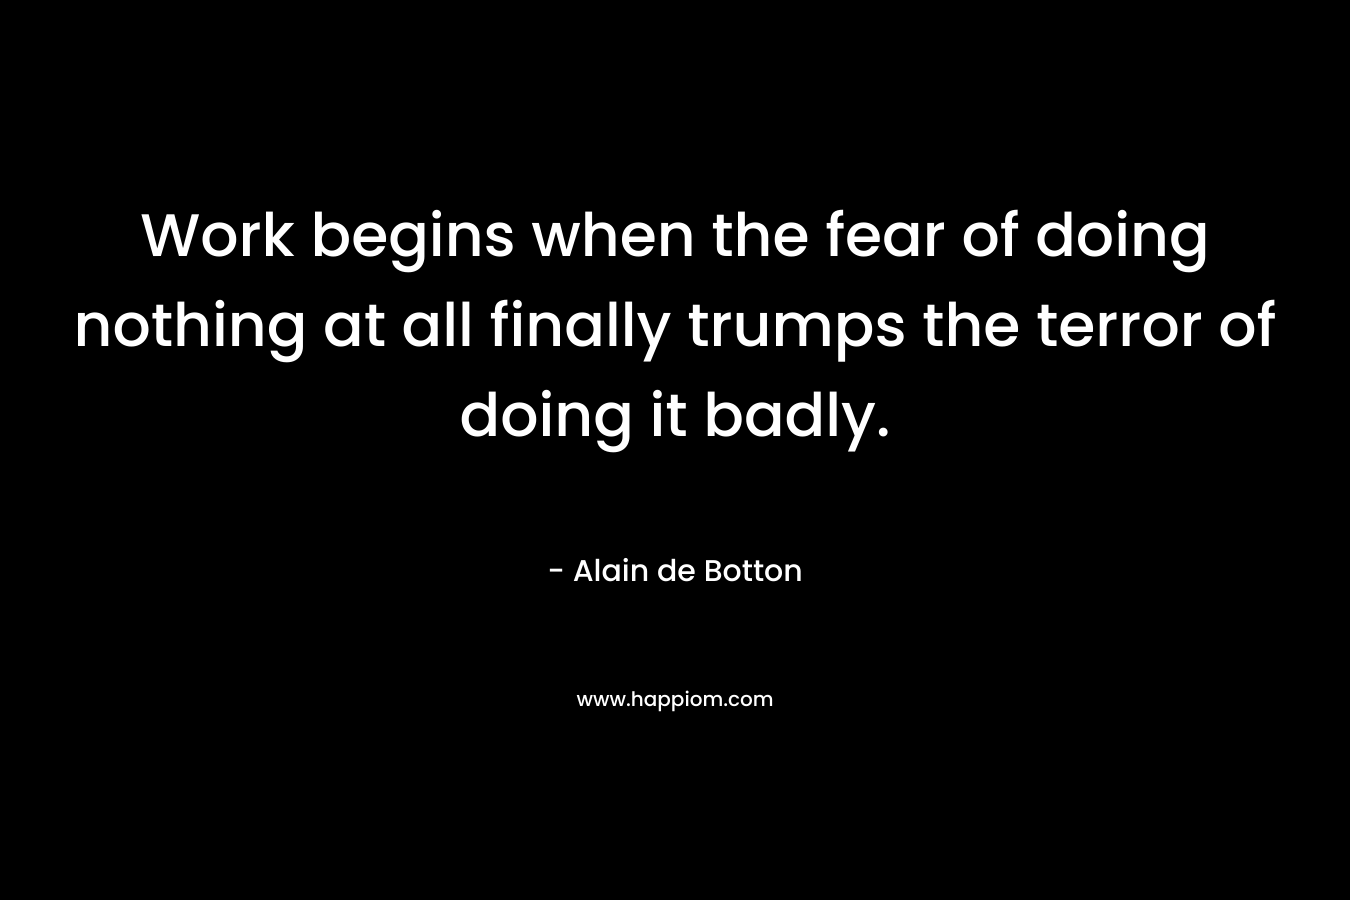 Work begins when the fear of doing nothing at all finally trumps the terror of doing it badly.